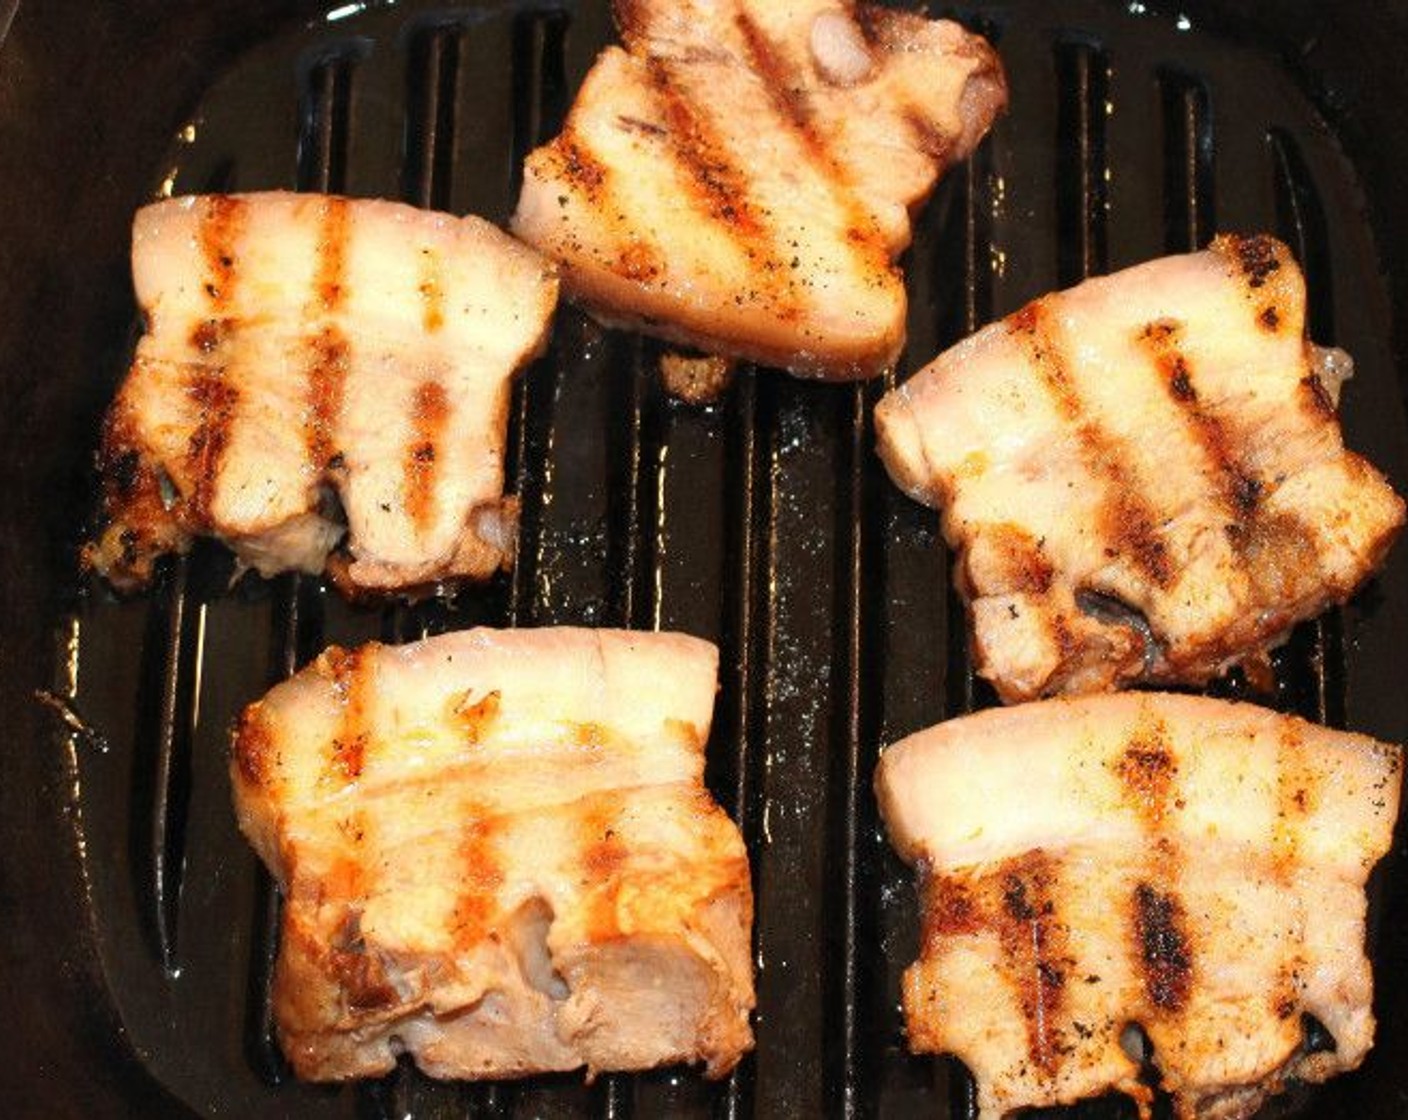 step 7 Grill on a grill or in a grill pan until there are nice grill marks.